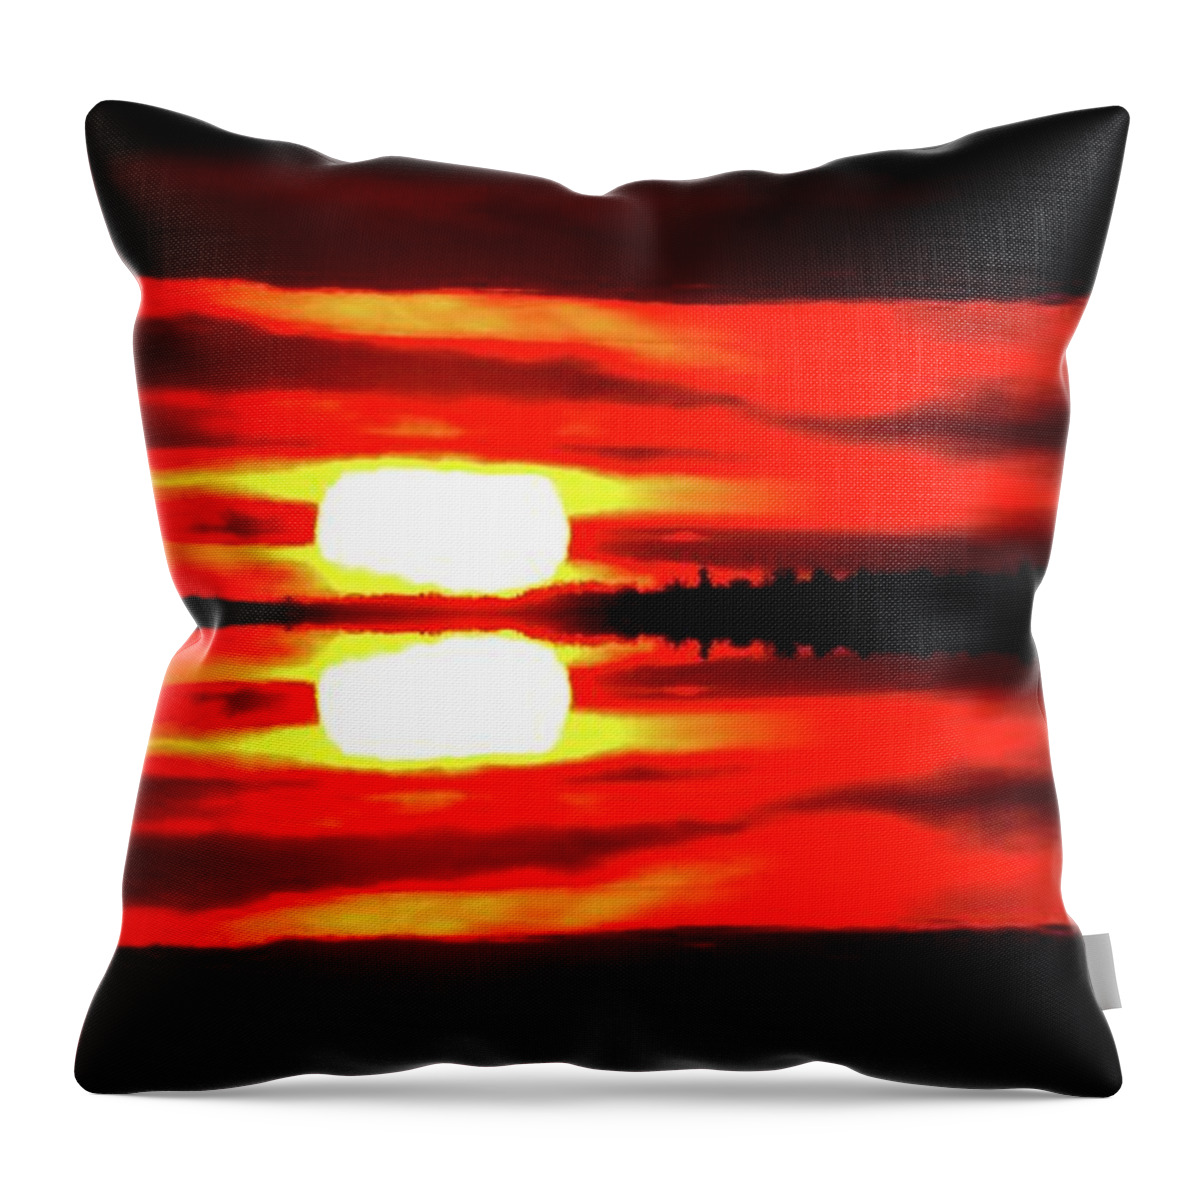 Landscape Throw Pillow featuring the digital art Sunrise Second Three by Lyle Crump